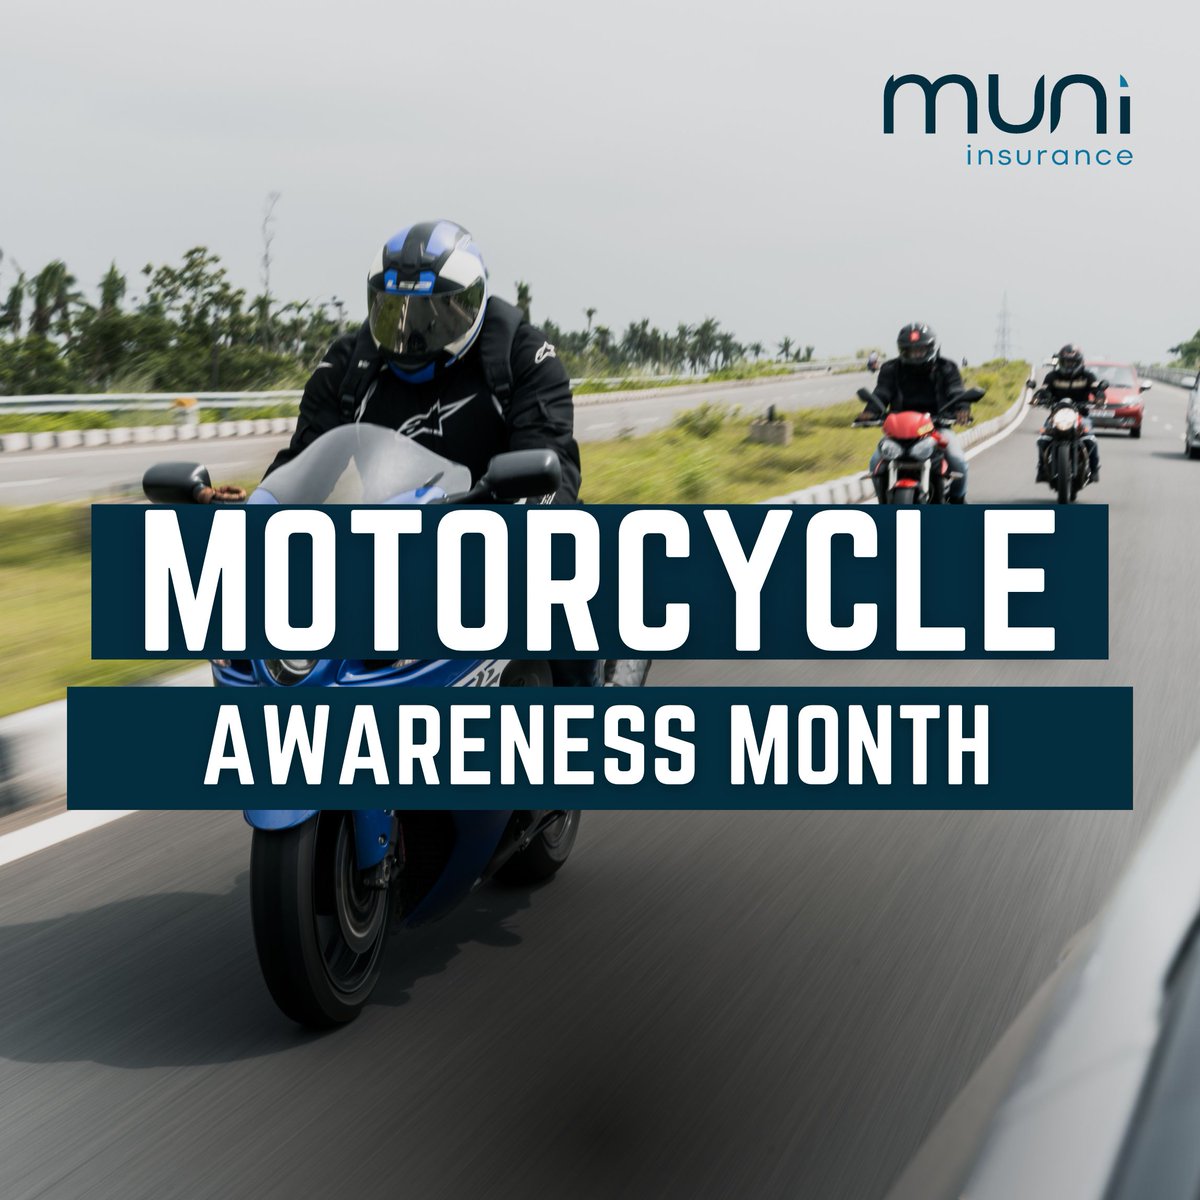 This month and every month, let's all commit to safe and responsible riding and driving. 

Drivers, remember to leave extra space when passing motorcycles! 

#muniinsurance #motorcyclesafetymonth #motorcycleawarenessmonth